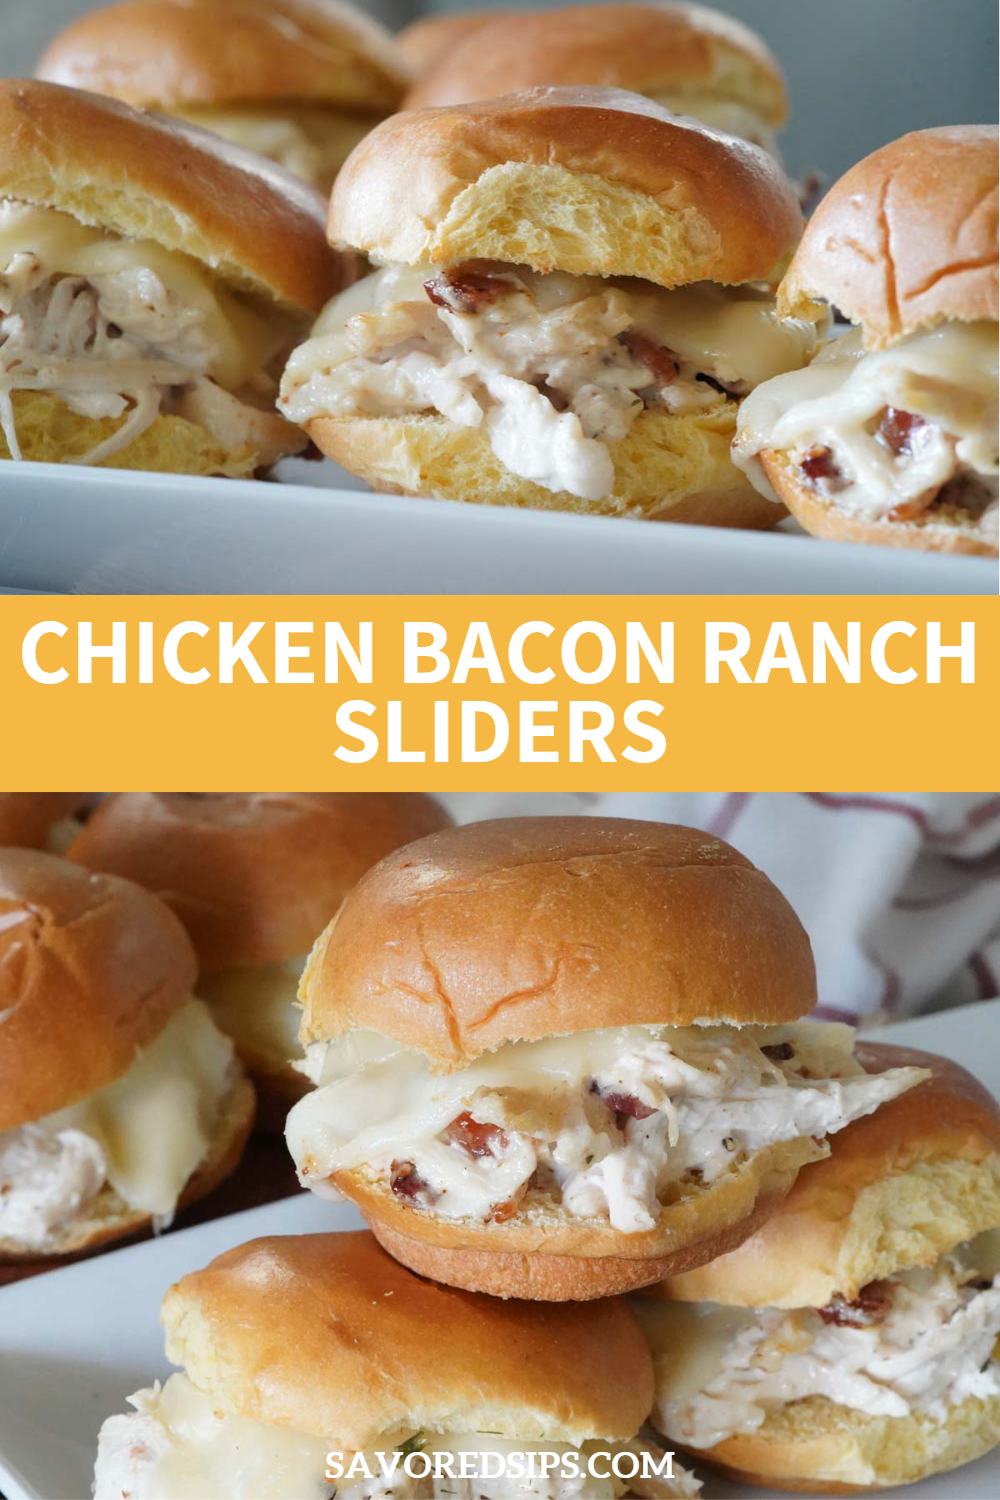 Chicken bacon and ranch sliders